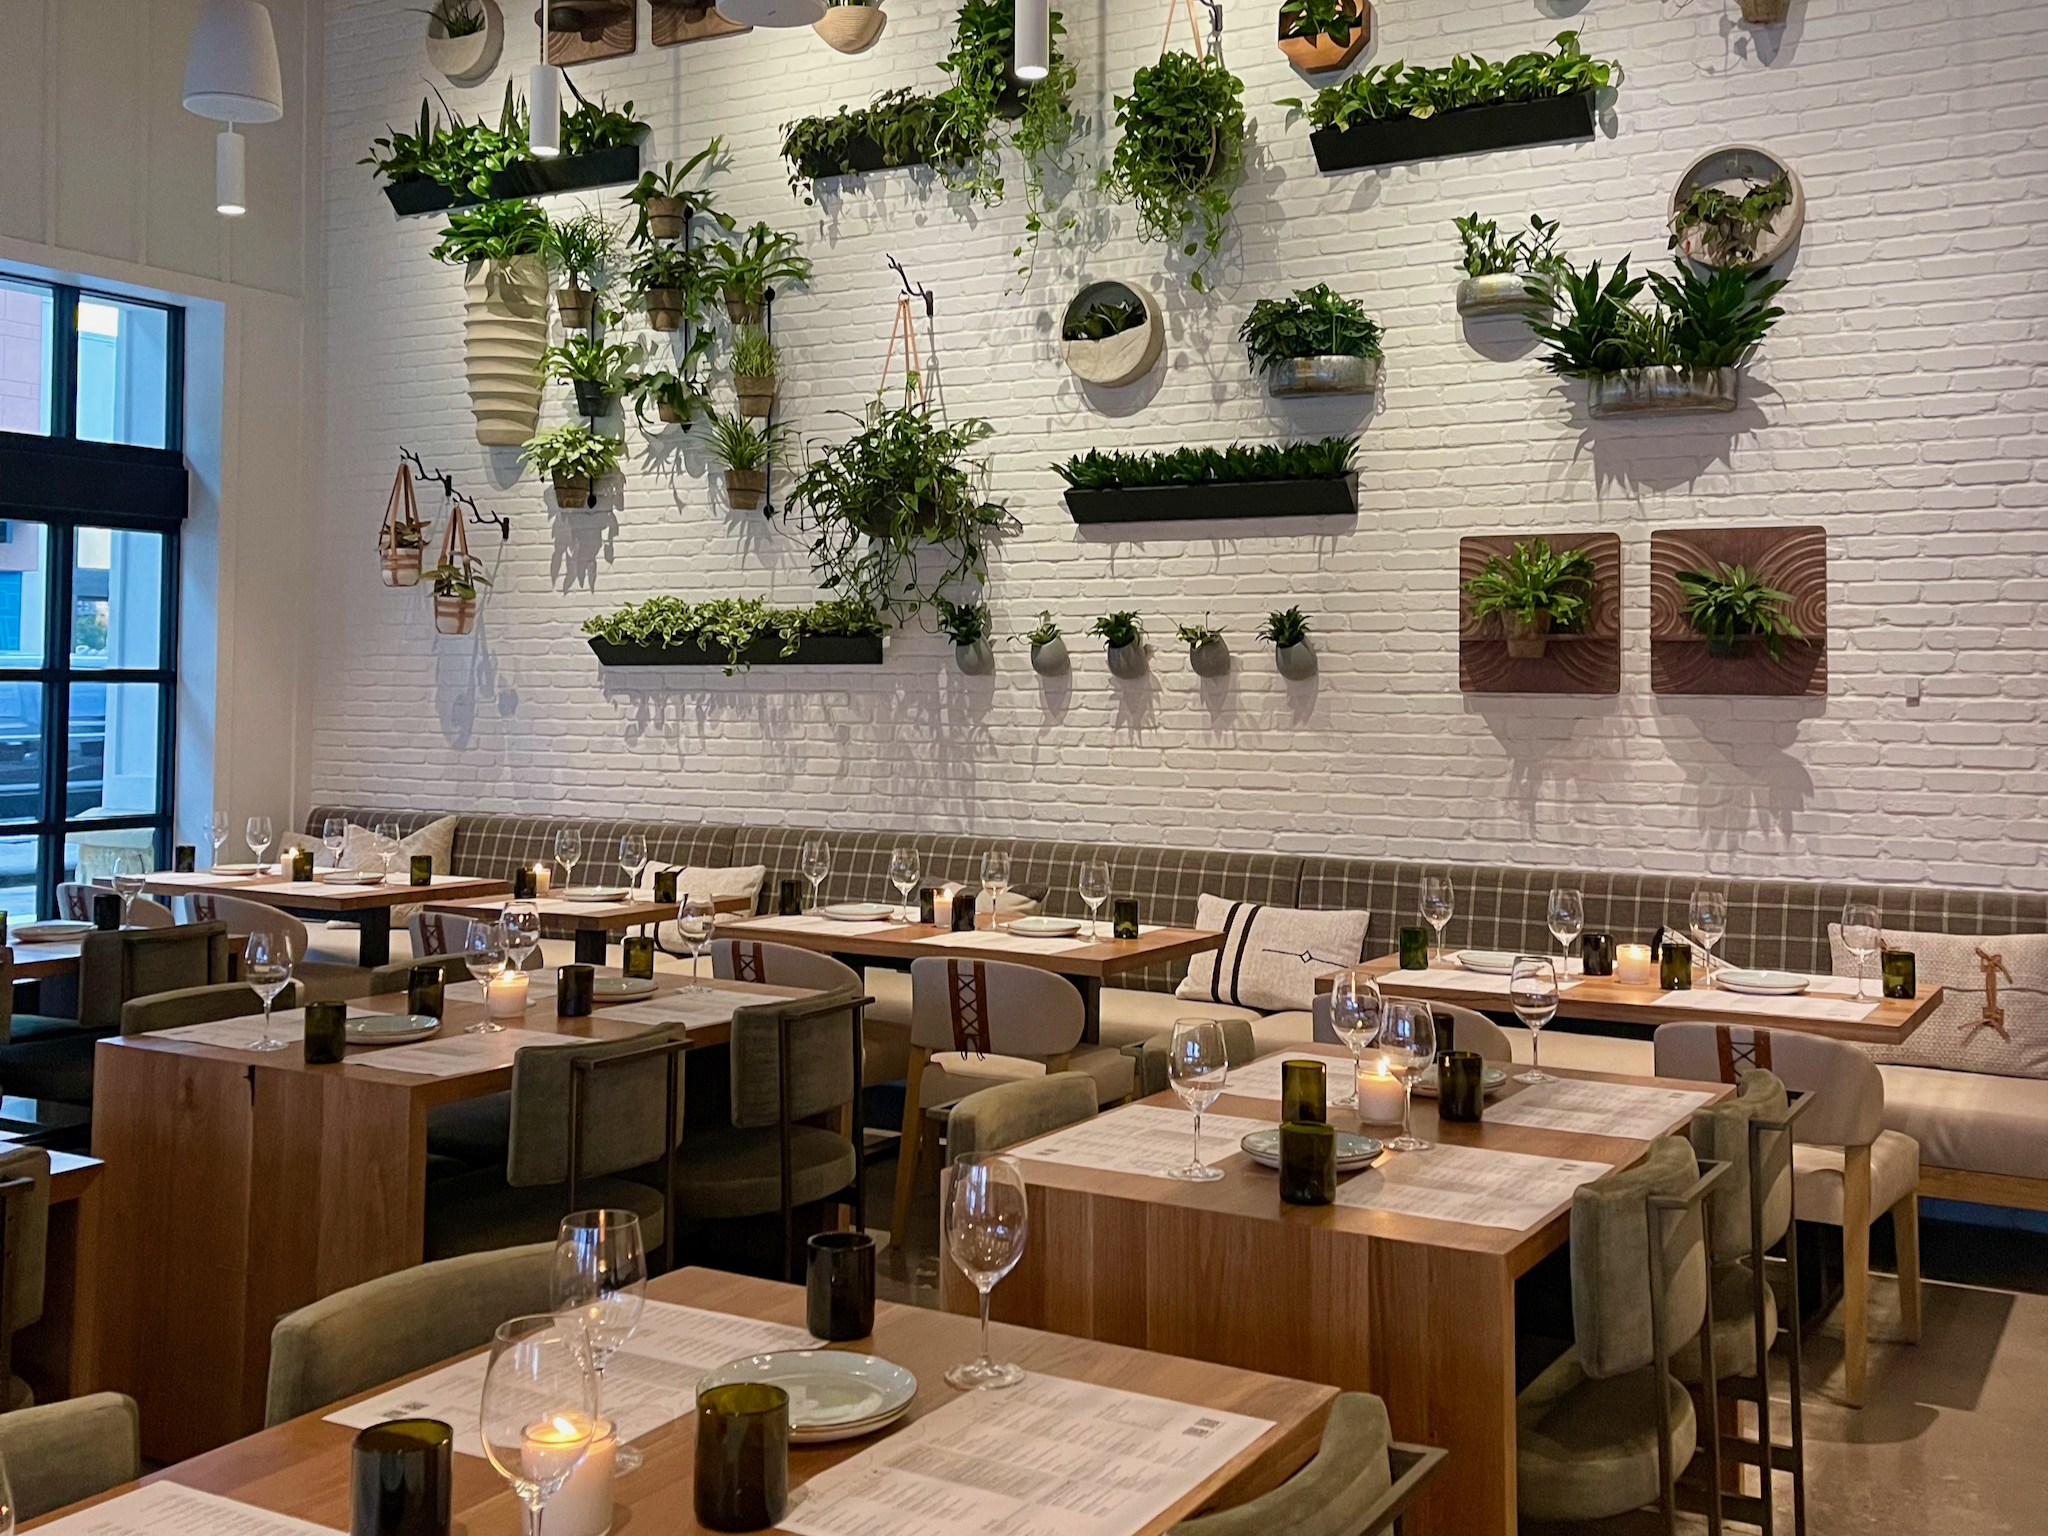 Sixty Vines slated for November opening in The Woodlands' Market